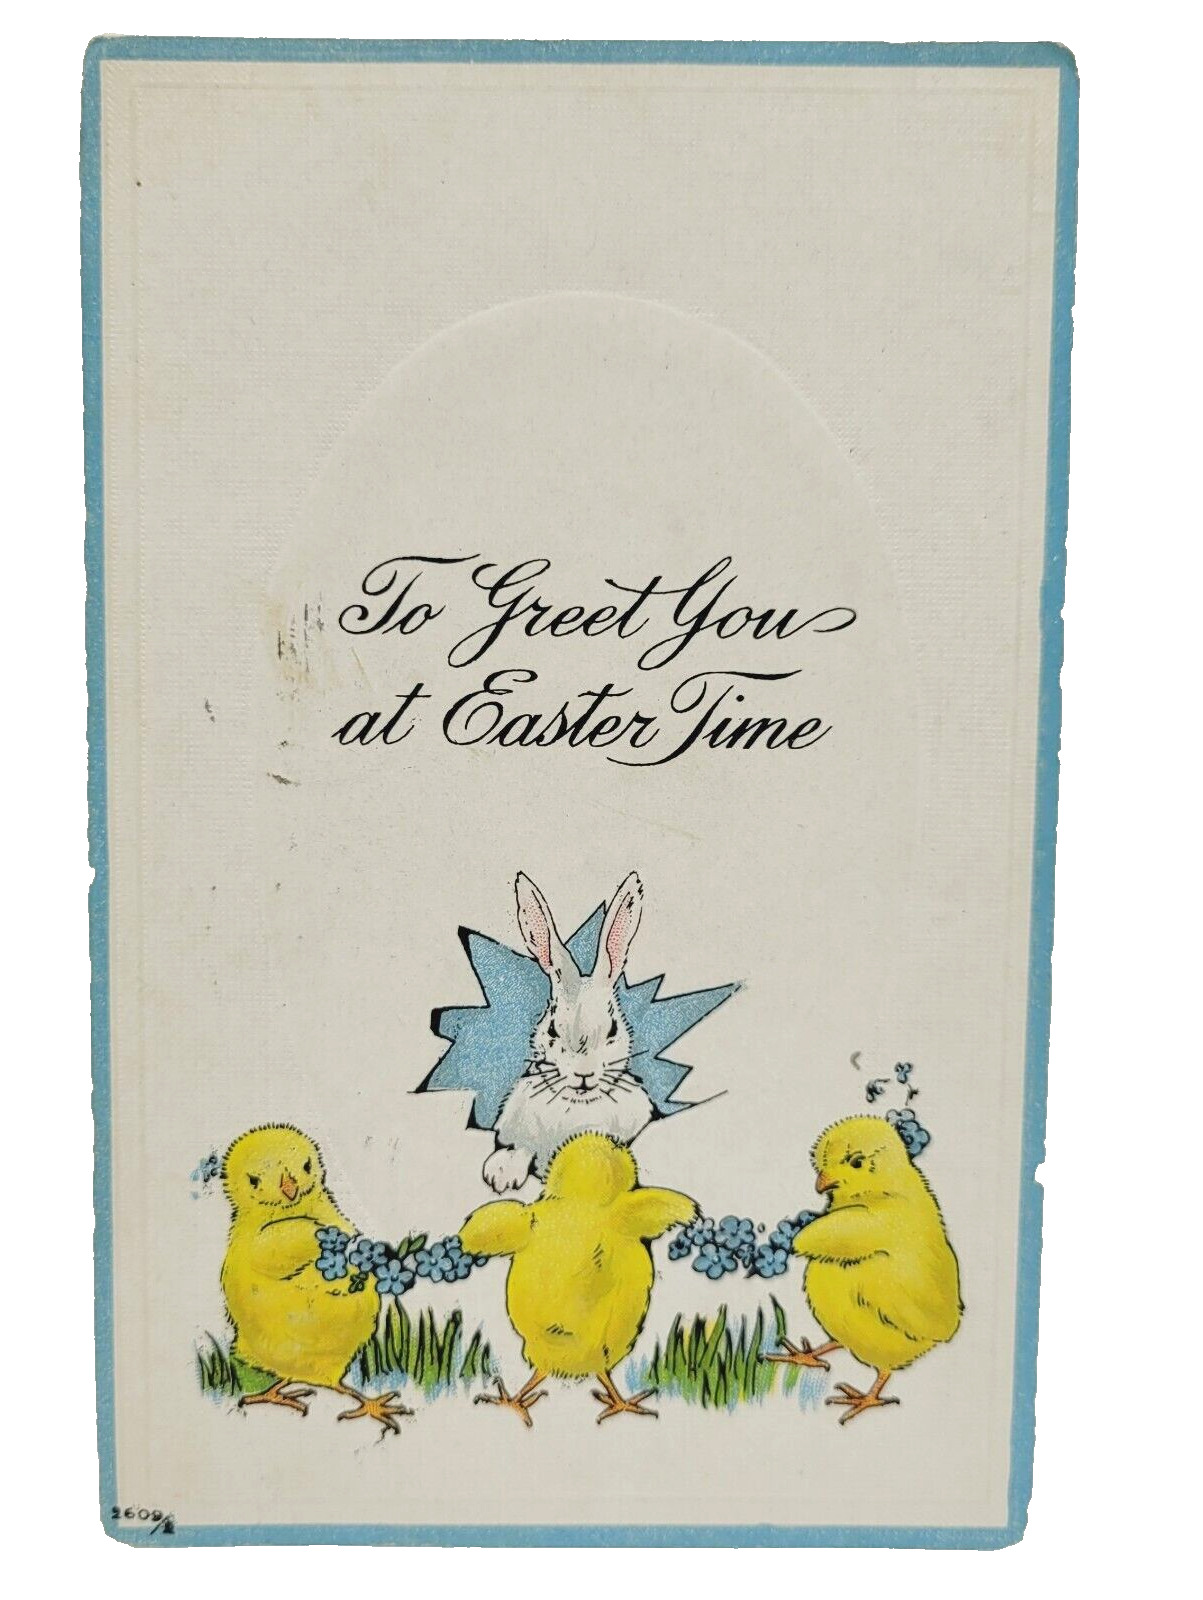 Antique 1916 To Great You at Easter Time Chicks Rabbit Egg Postcard Cancel Stamp